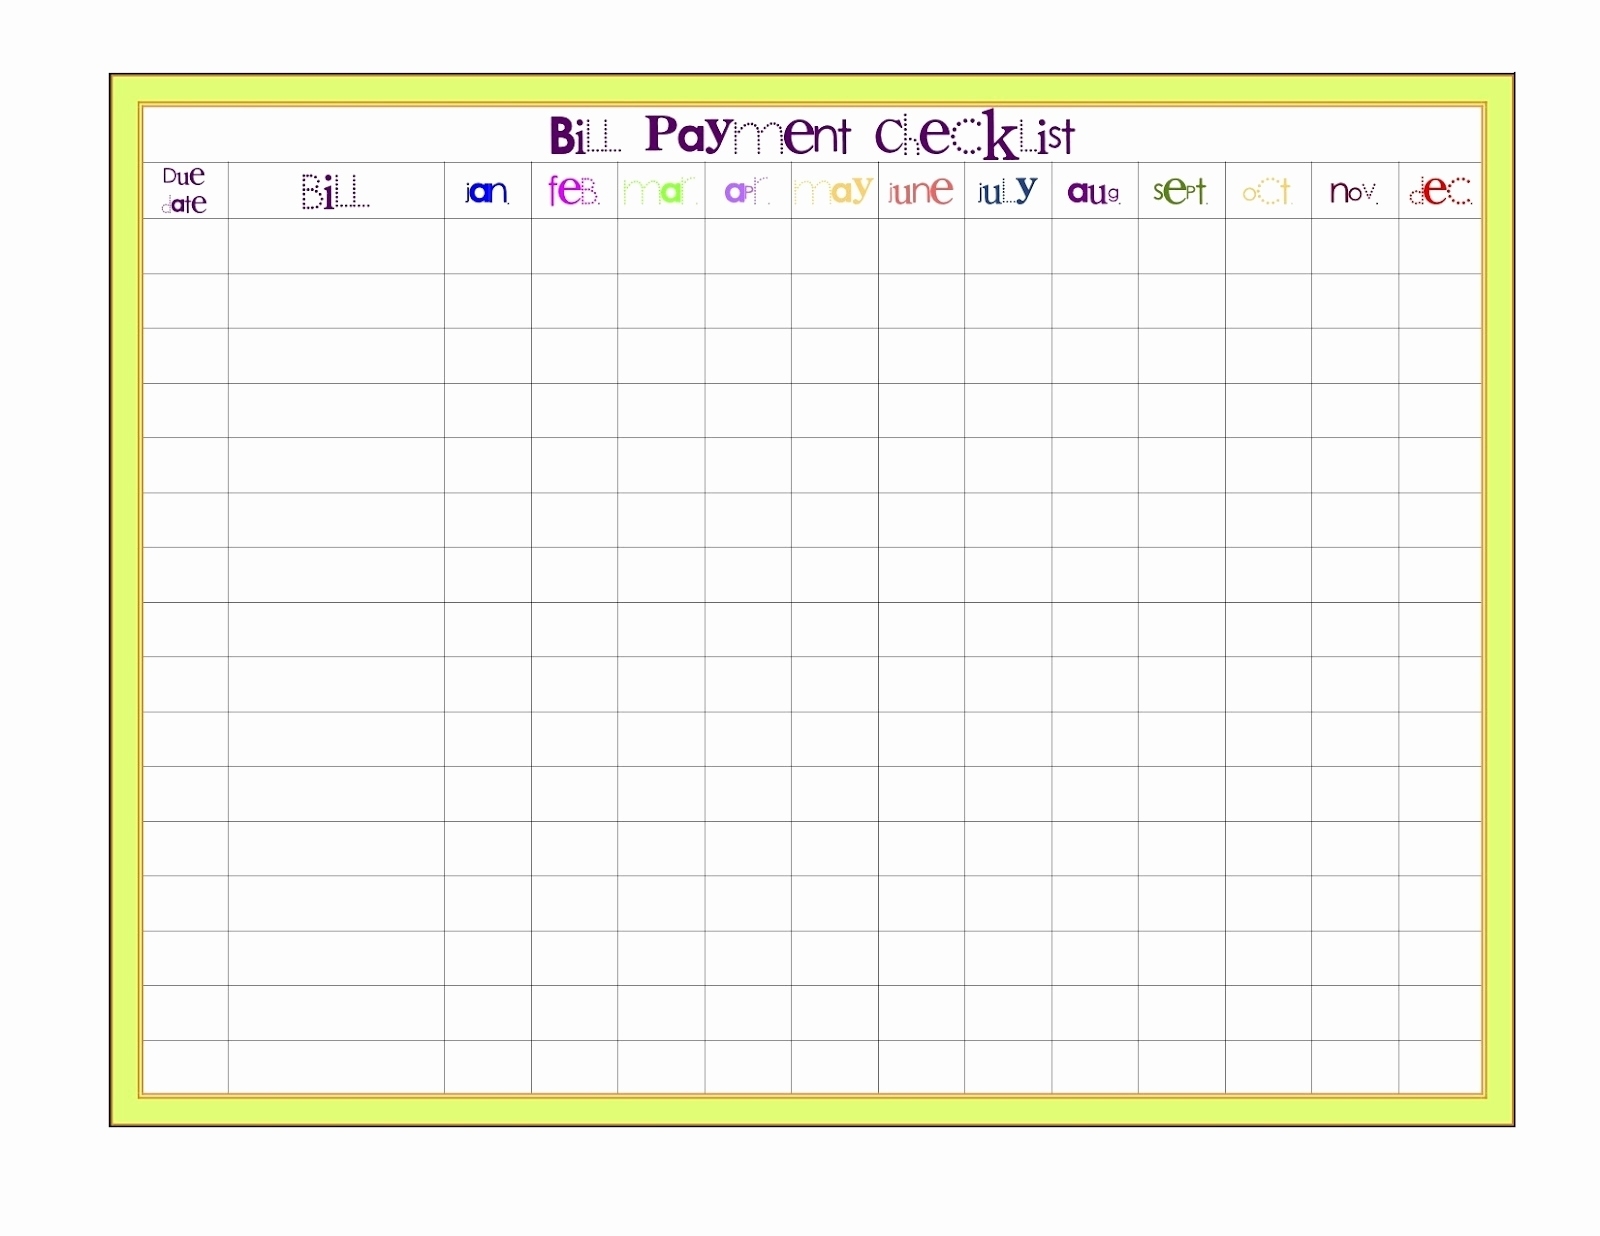 Bill Pay Calendar Template Hola Ibmdatamanagement Co St My Frugal throughout Free Printable Calendars For Bills